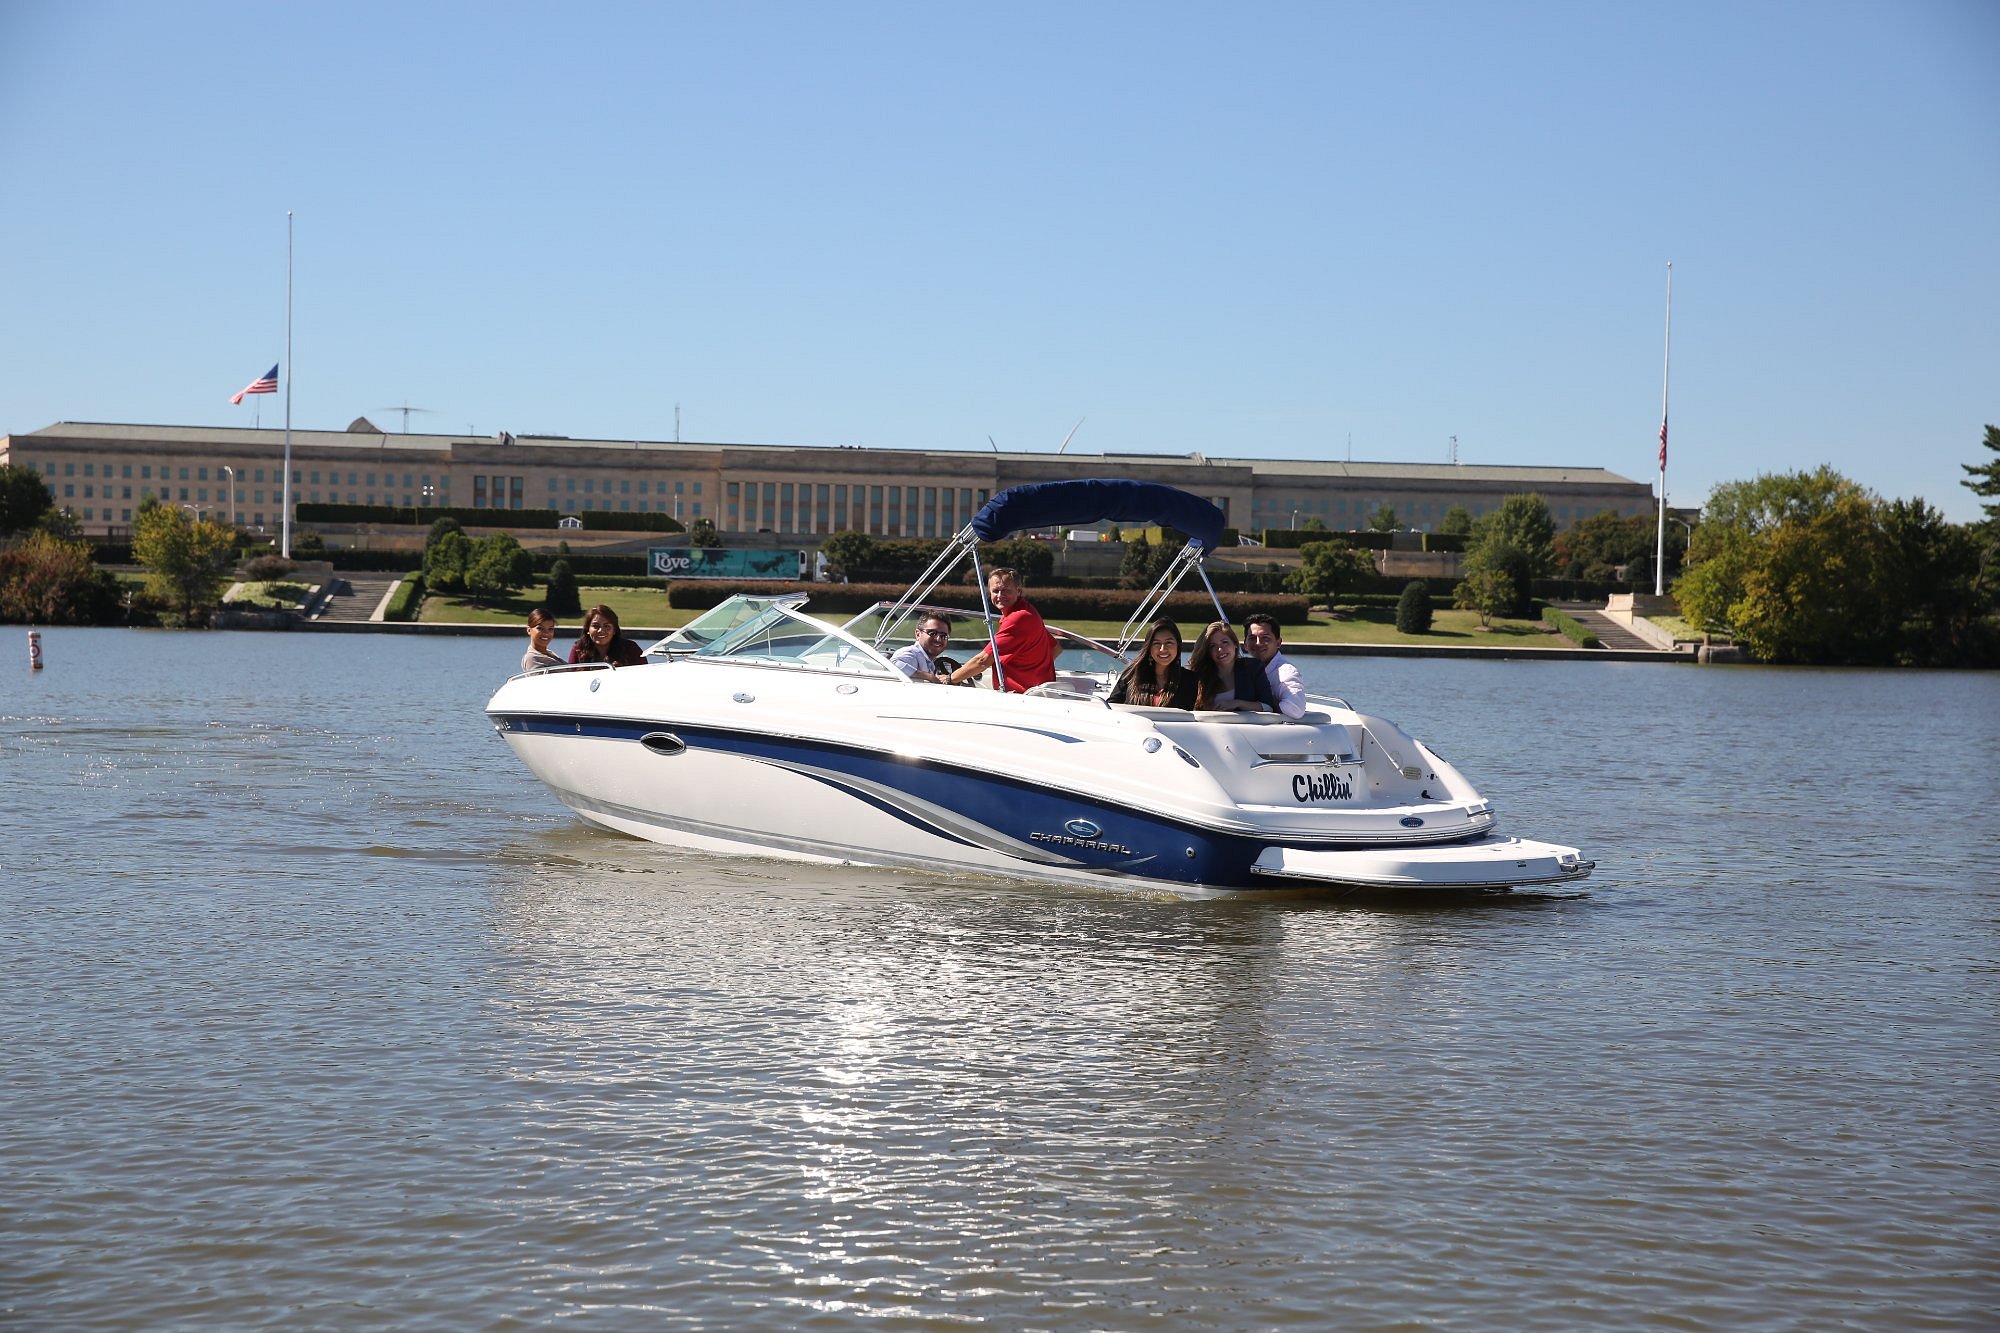 dc boat tours & charters